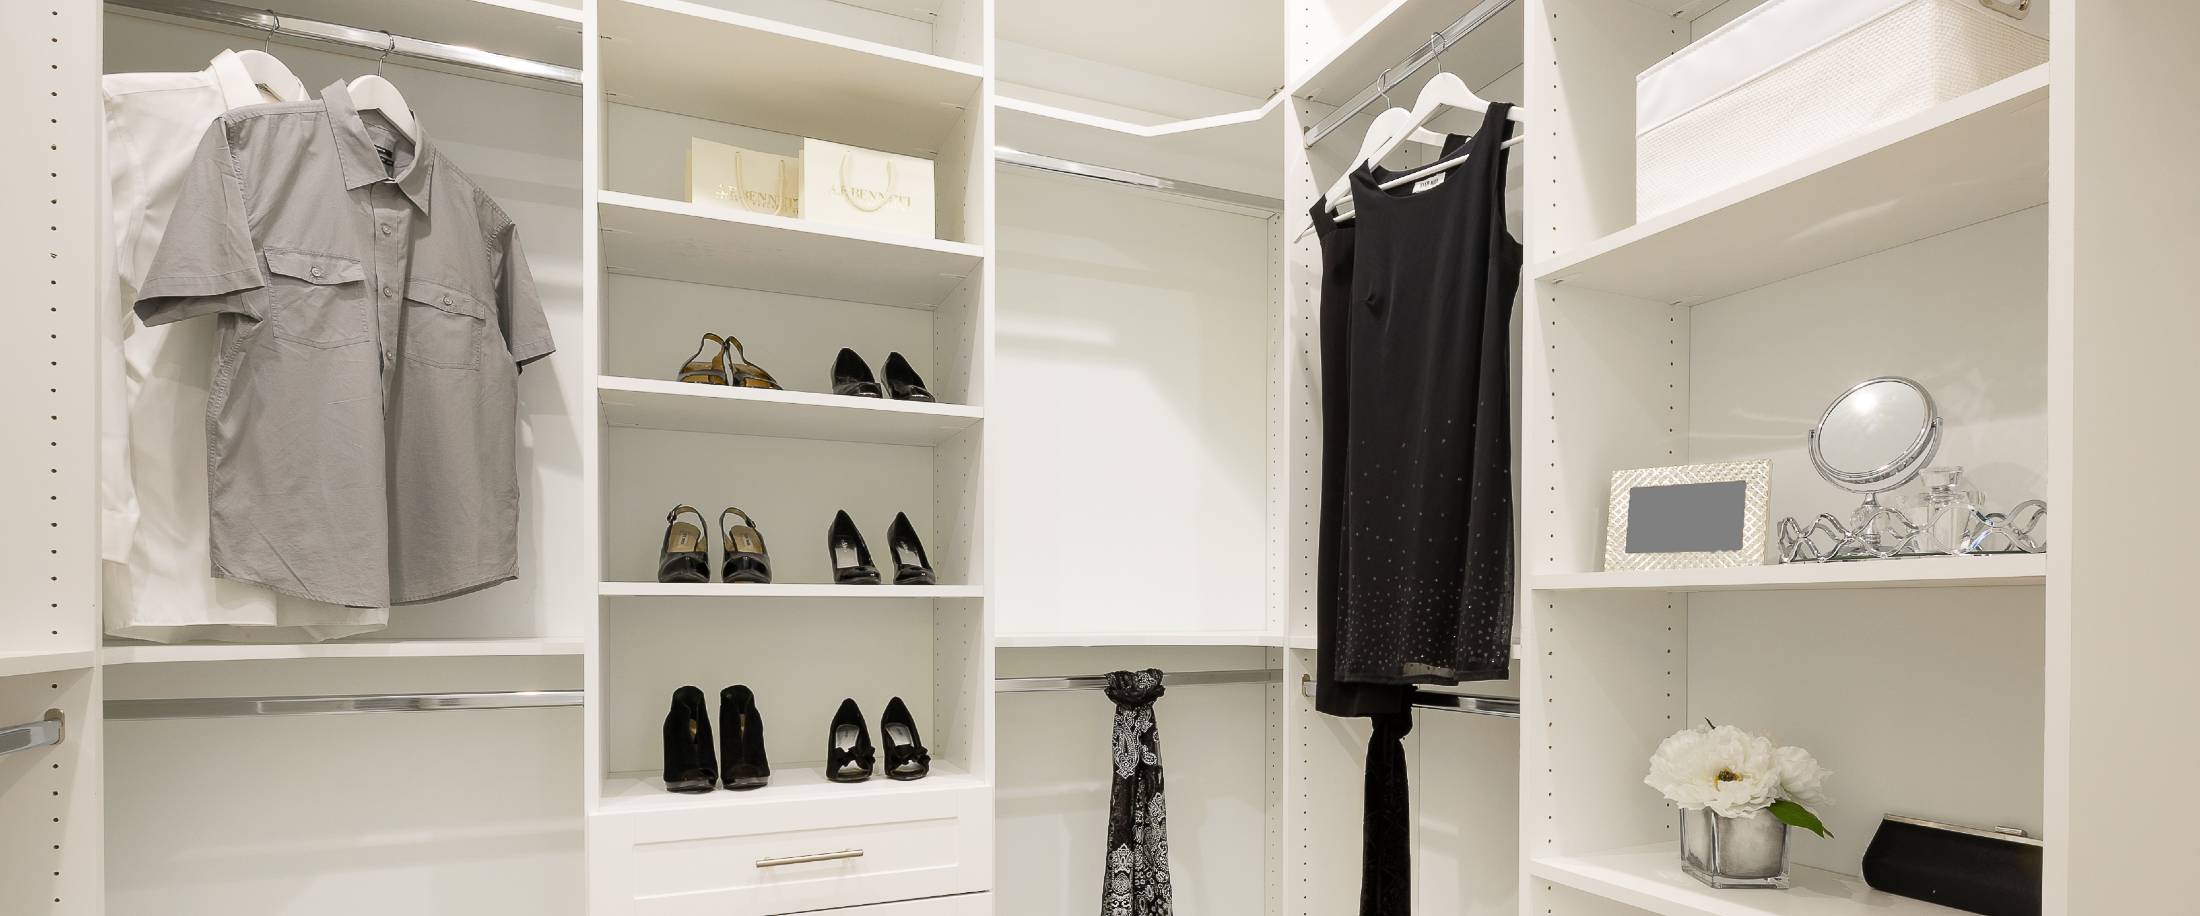 Closet Organizing Tips to Incorporate from these Dream Closets